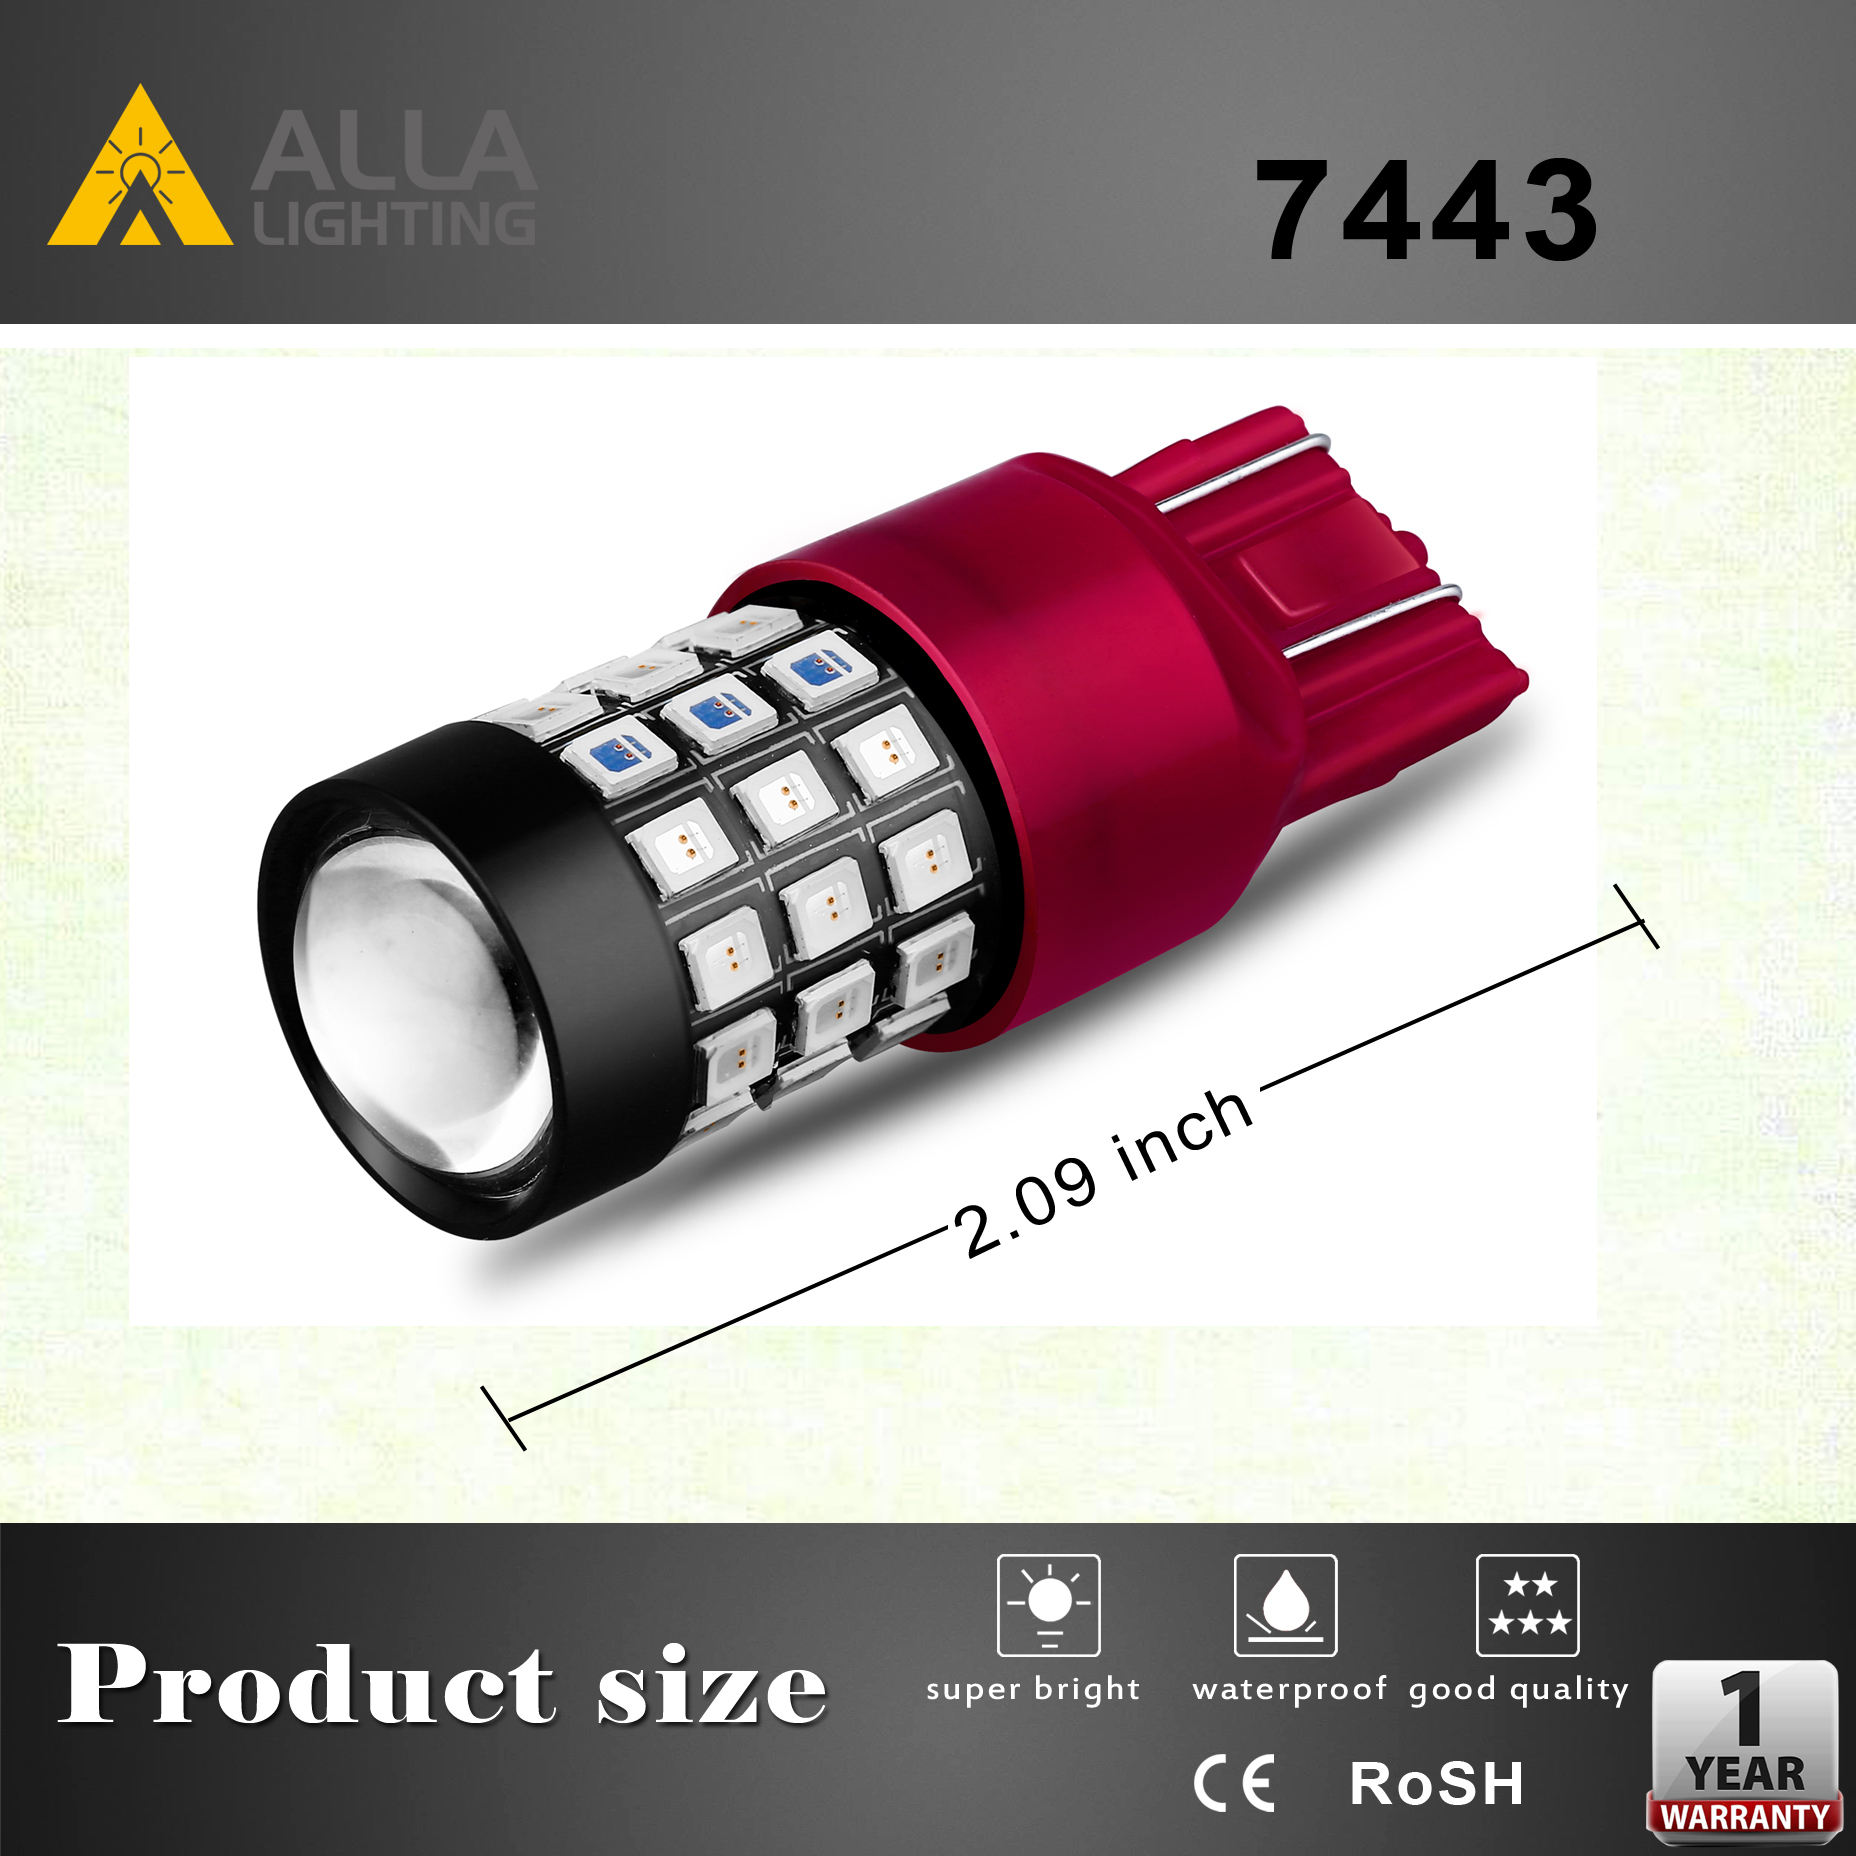 Alla Lighting 2pcs Super Bright Pure Red 7443 W21//5W LED Bulbs for Rear Brake Stop Tail Light Lamps for 2009 2010 2011 2012 2013 2014 Nissan Cube